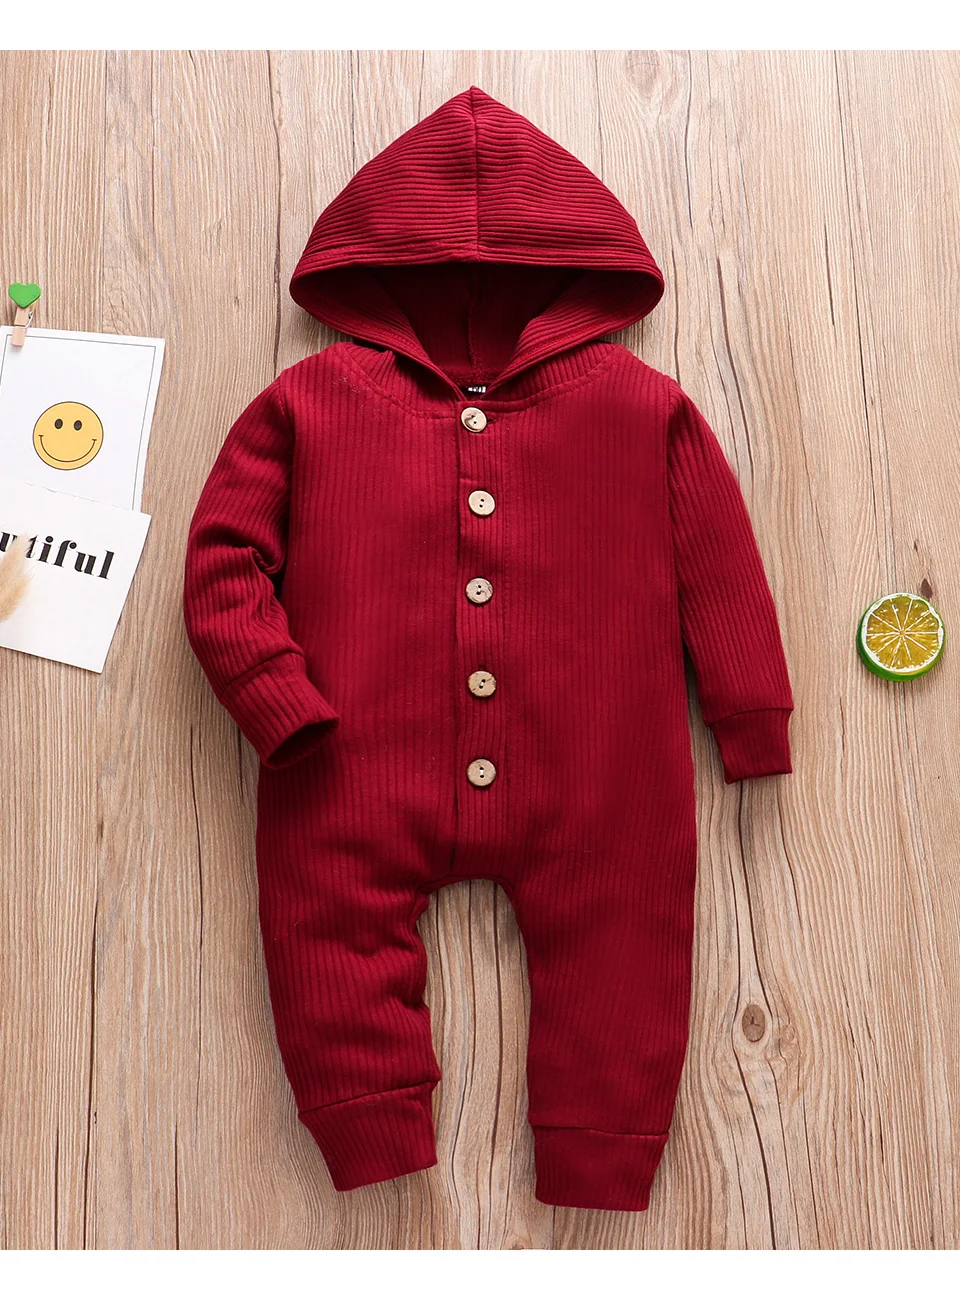 Autumn Newborn Clothes: Cotton Baby Romper with Hood